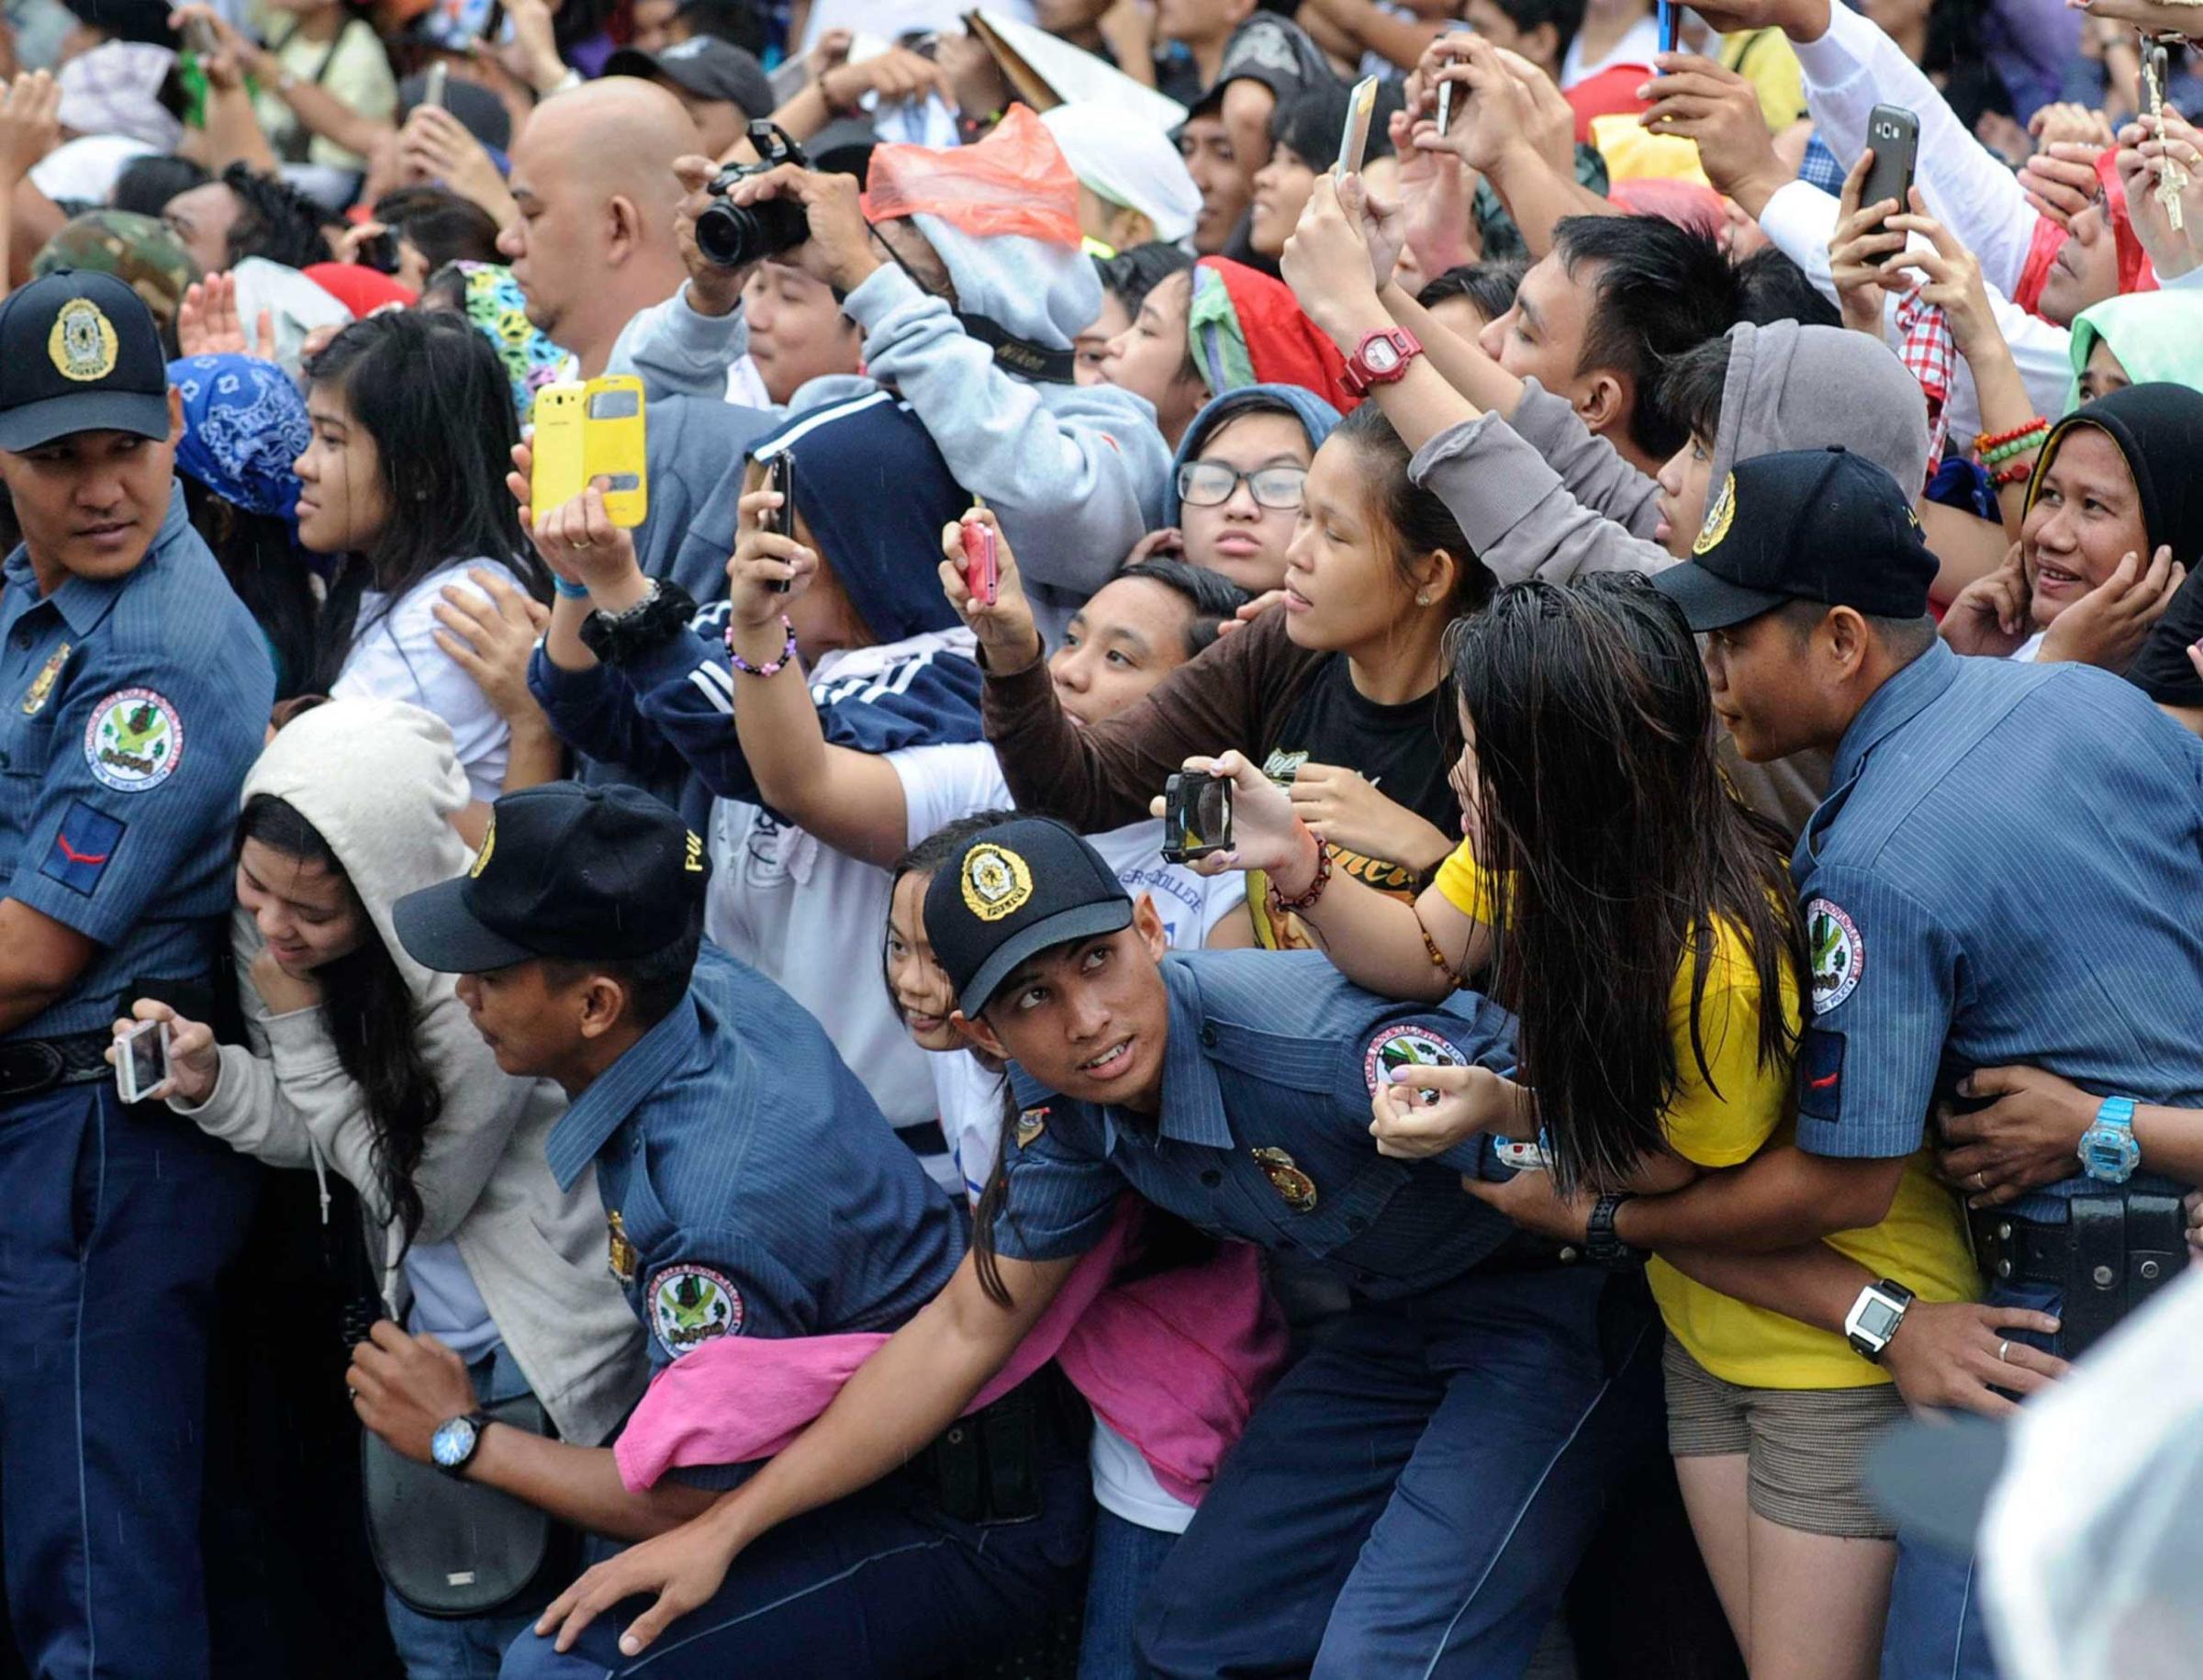 Members of the Philippine National Police prevent well-wishers from moving forward as Pope Francis' motorcade passes by in Manila, Jan. 18, 2015.